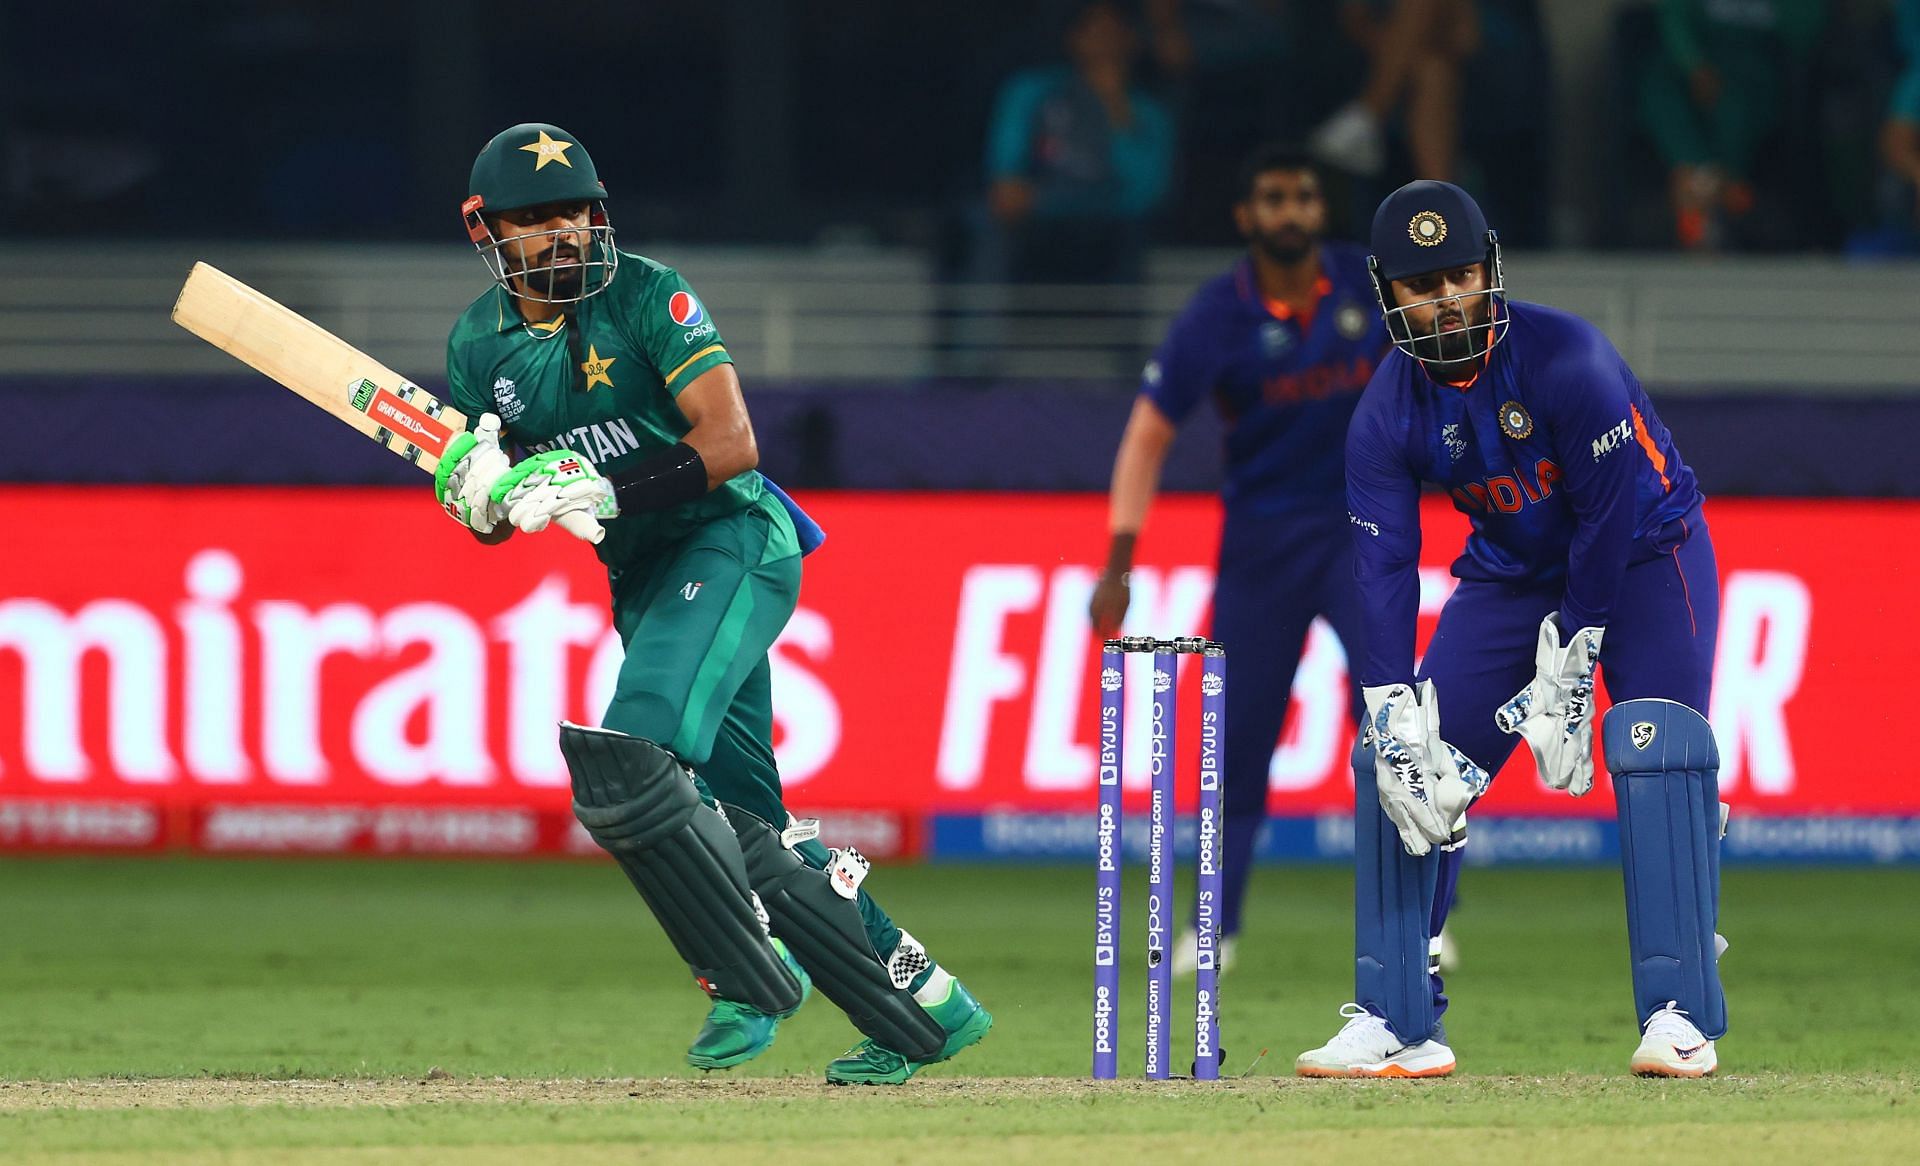 Pakistan captain Babar Azam during the India vs Pakistan T20 World Cup 2021 match. Pic: Getty Images